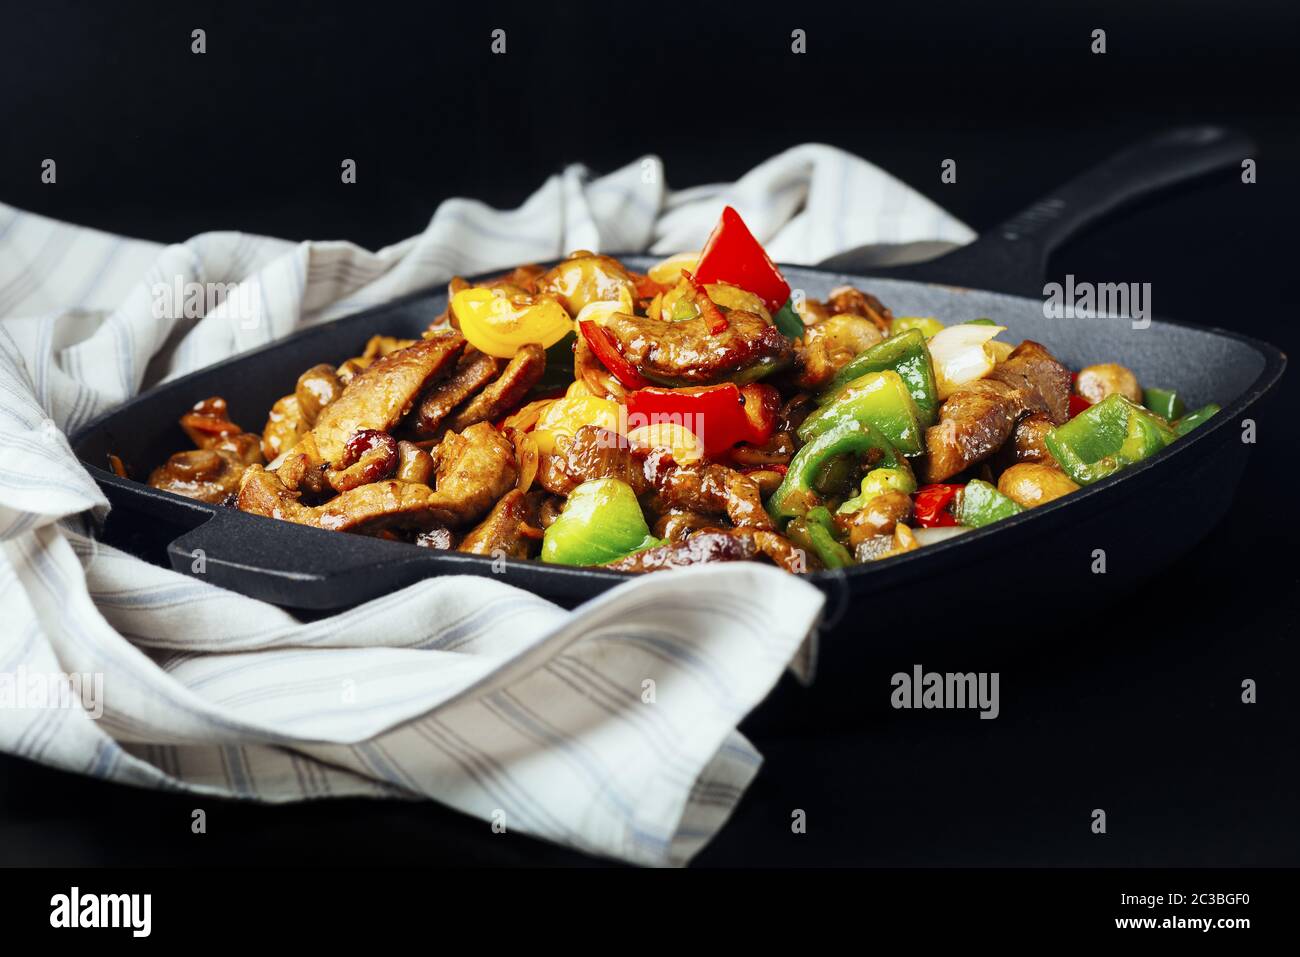 Fried meat and vegetables in cast iron pan Stock Photo